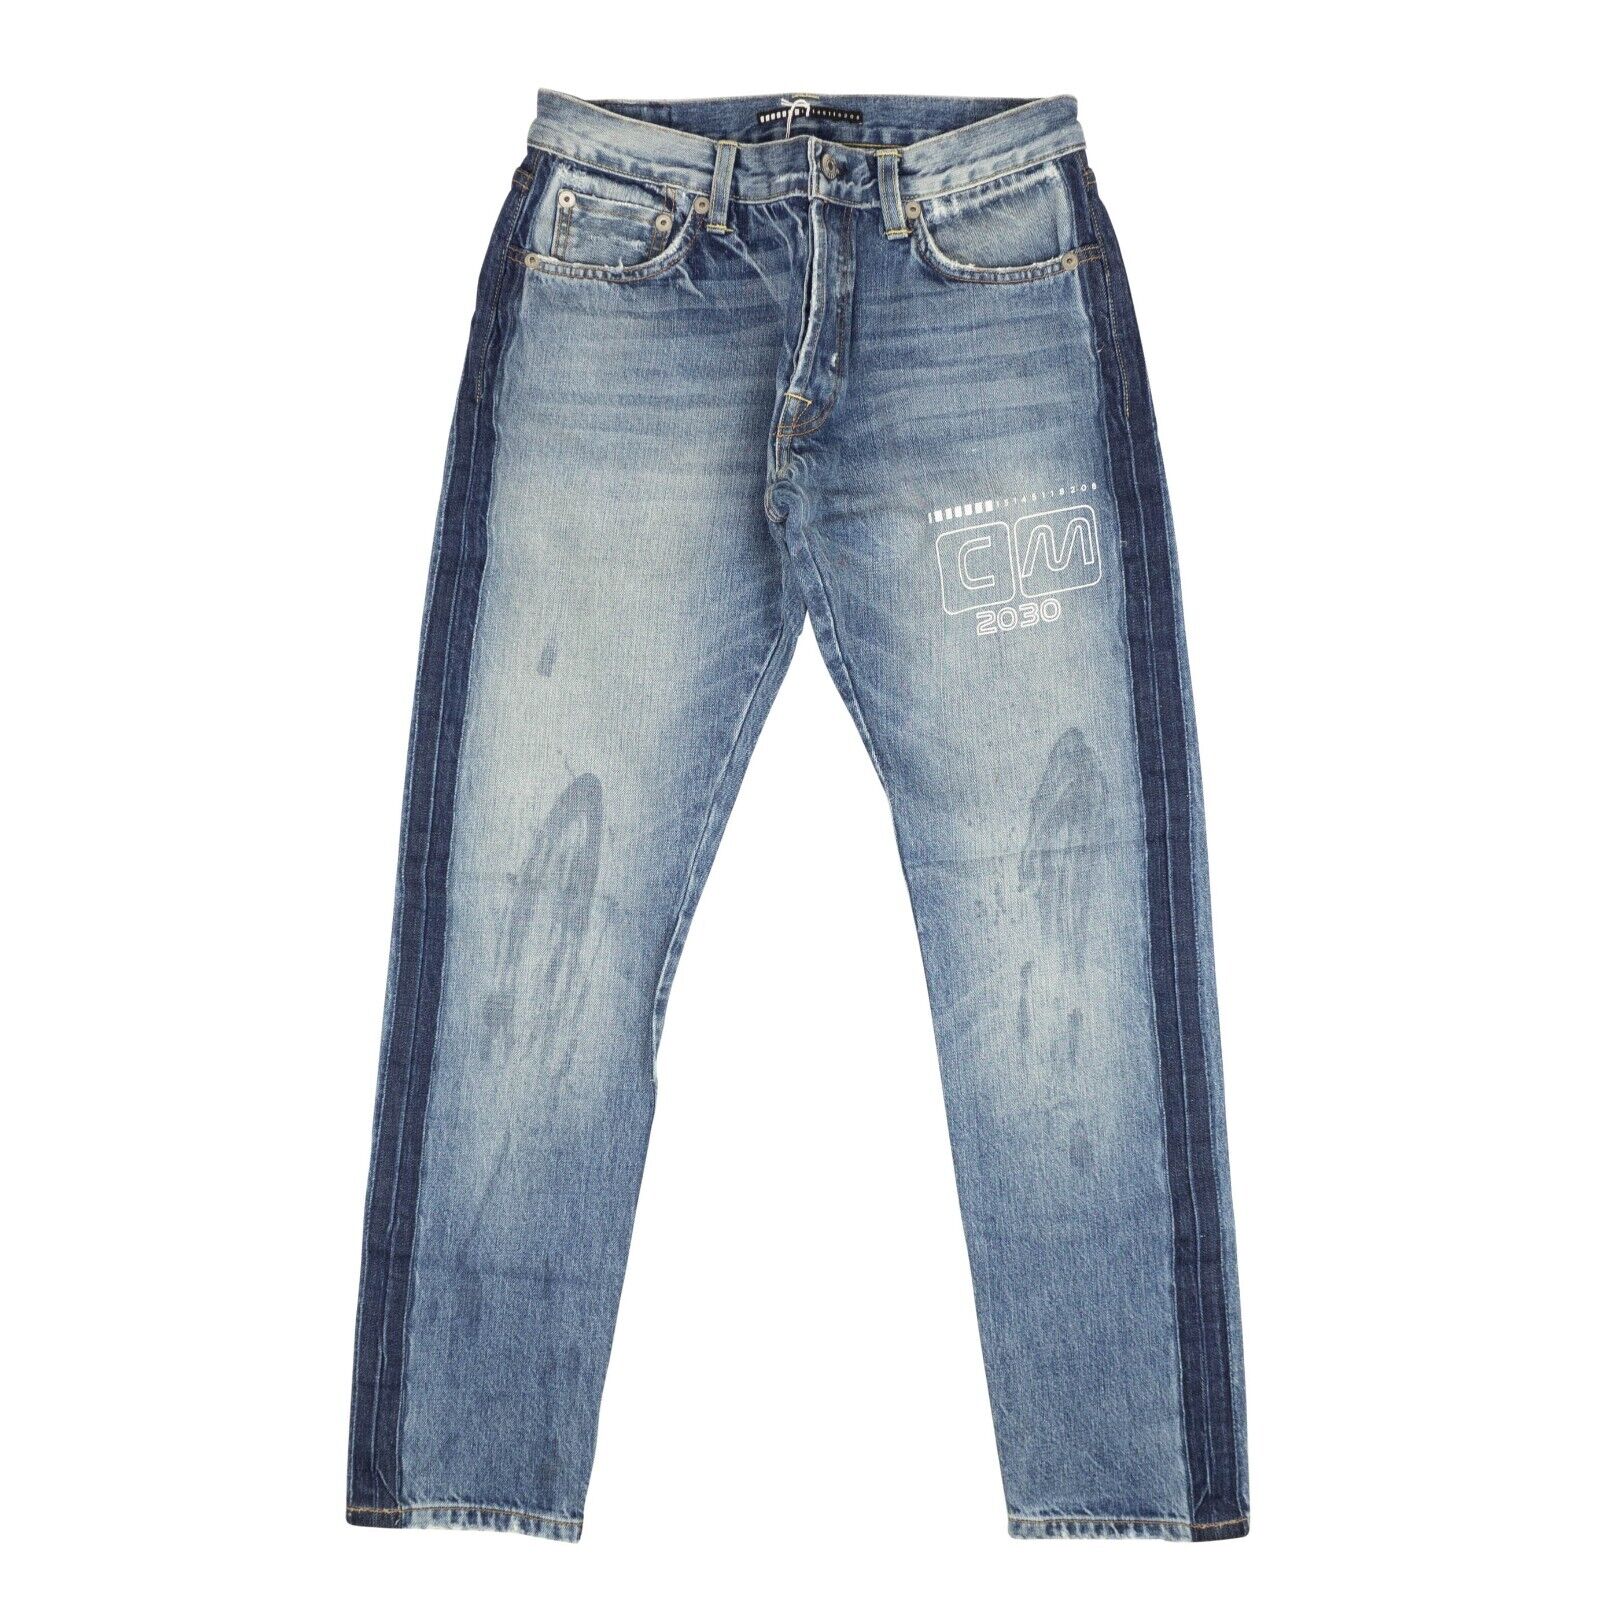 Visitor On Earth Washed Jeans - Blue